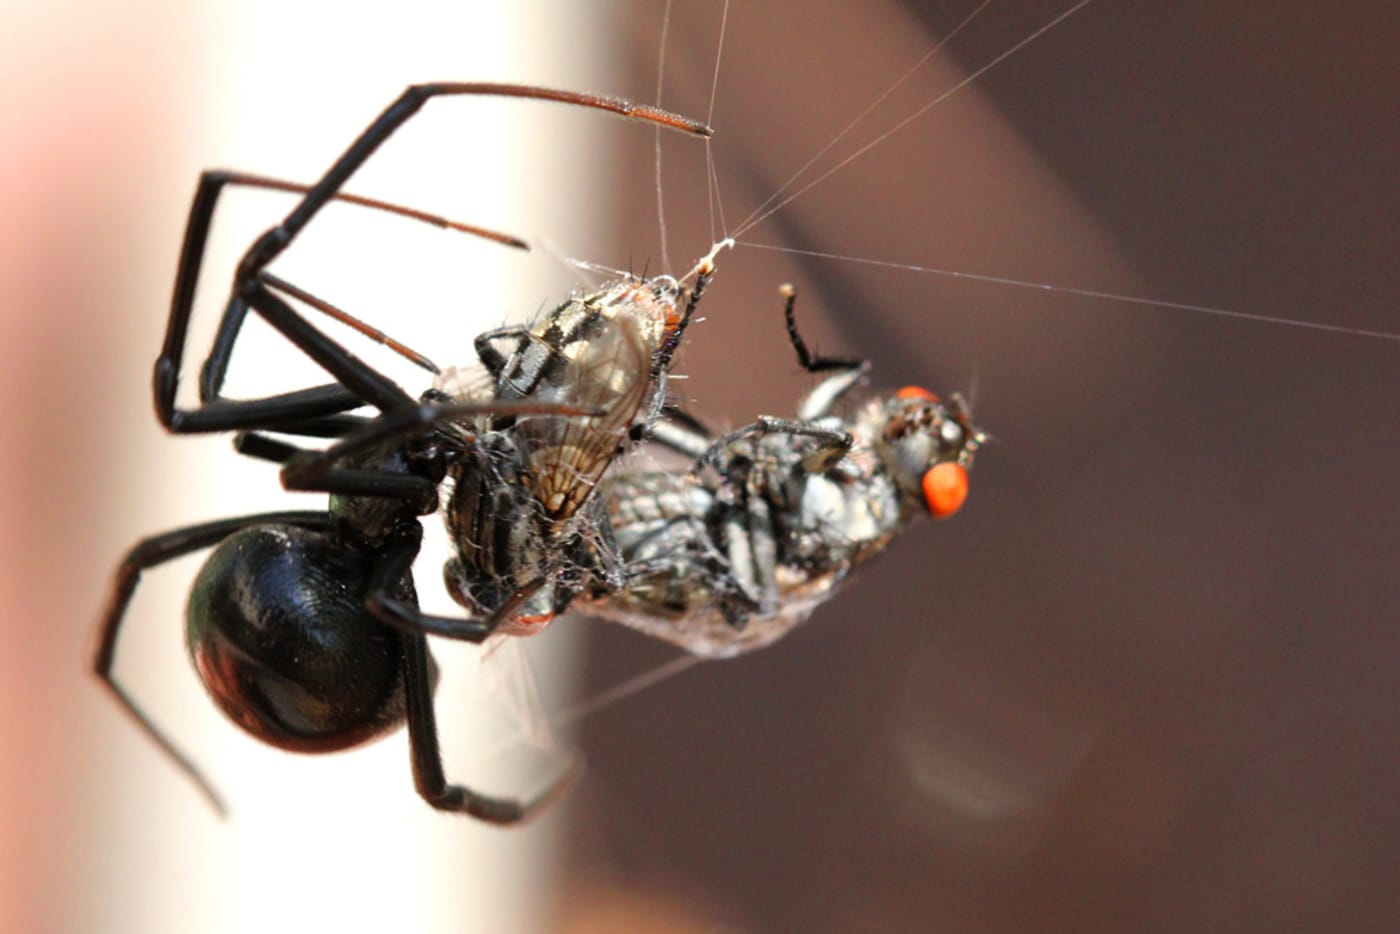 Black widow and its lunch CC BY 2.0 / siamesepuppy / Flickr